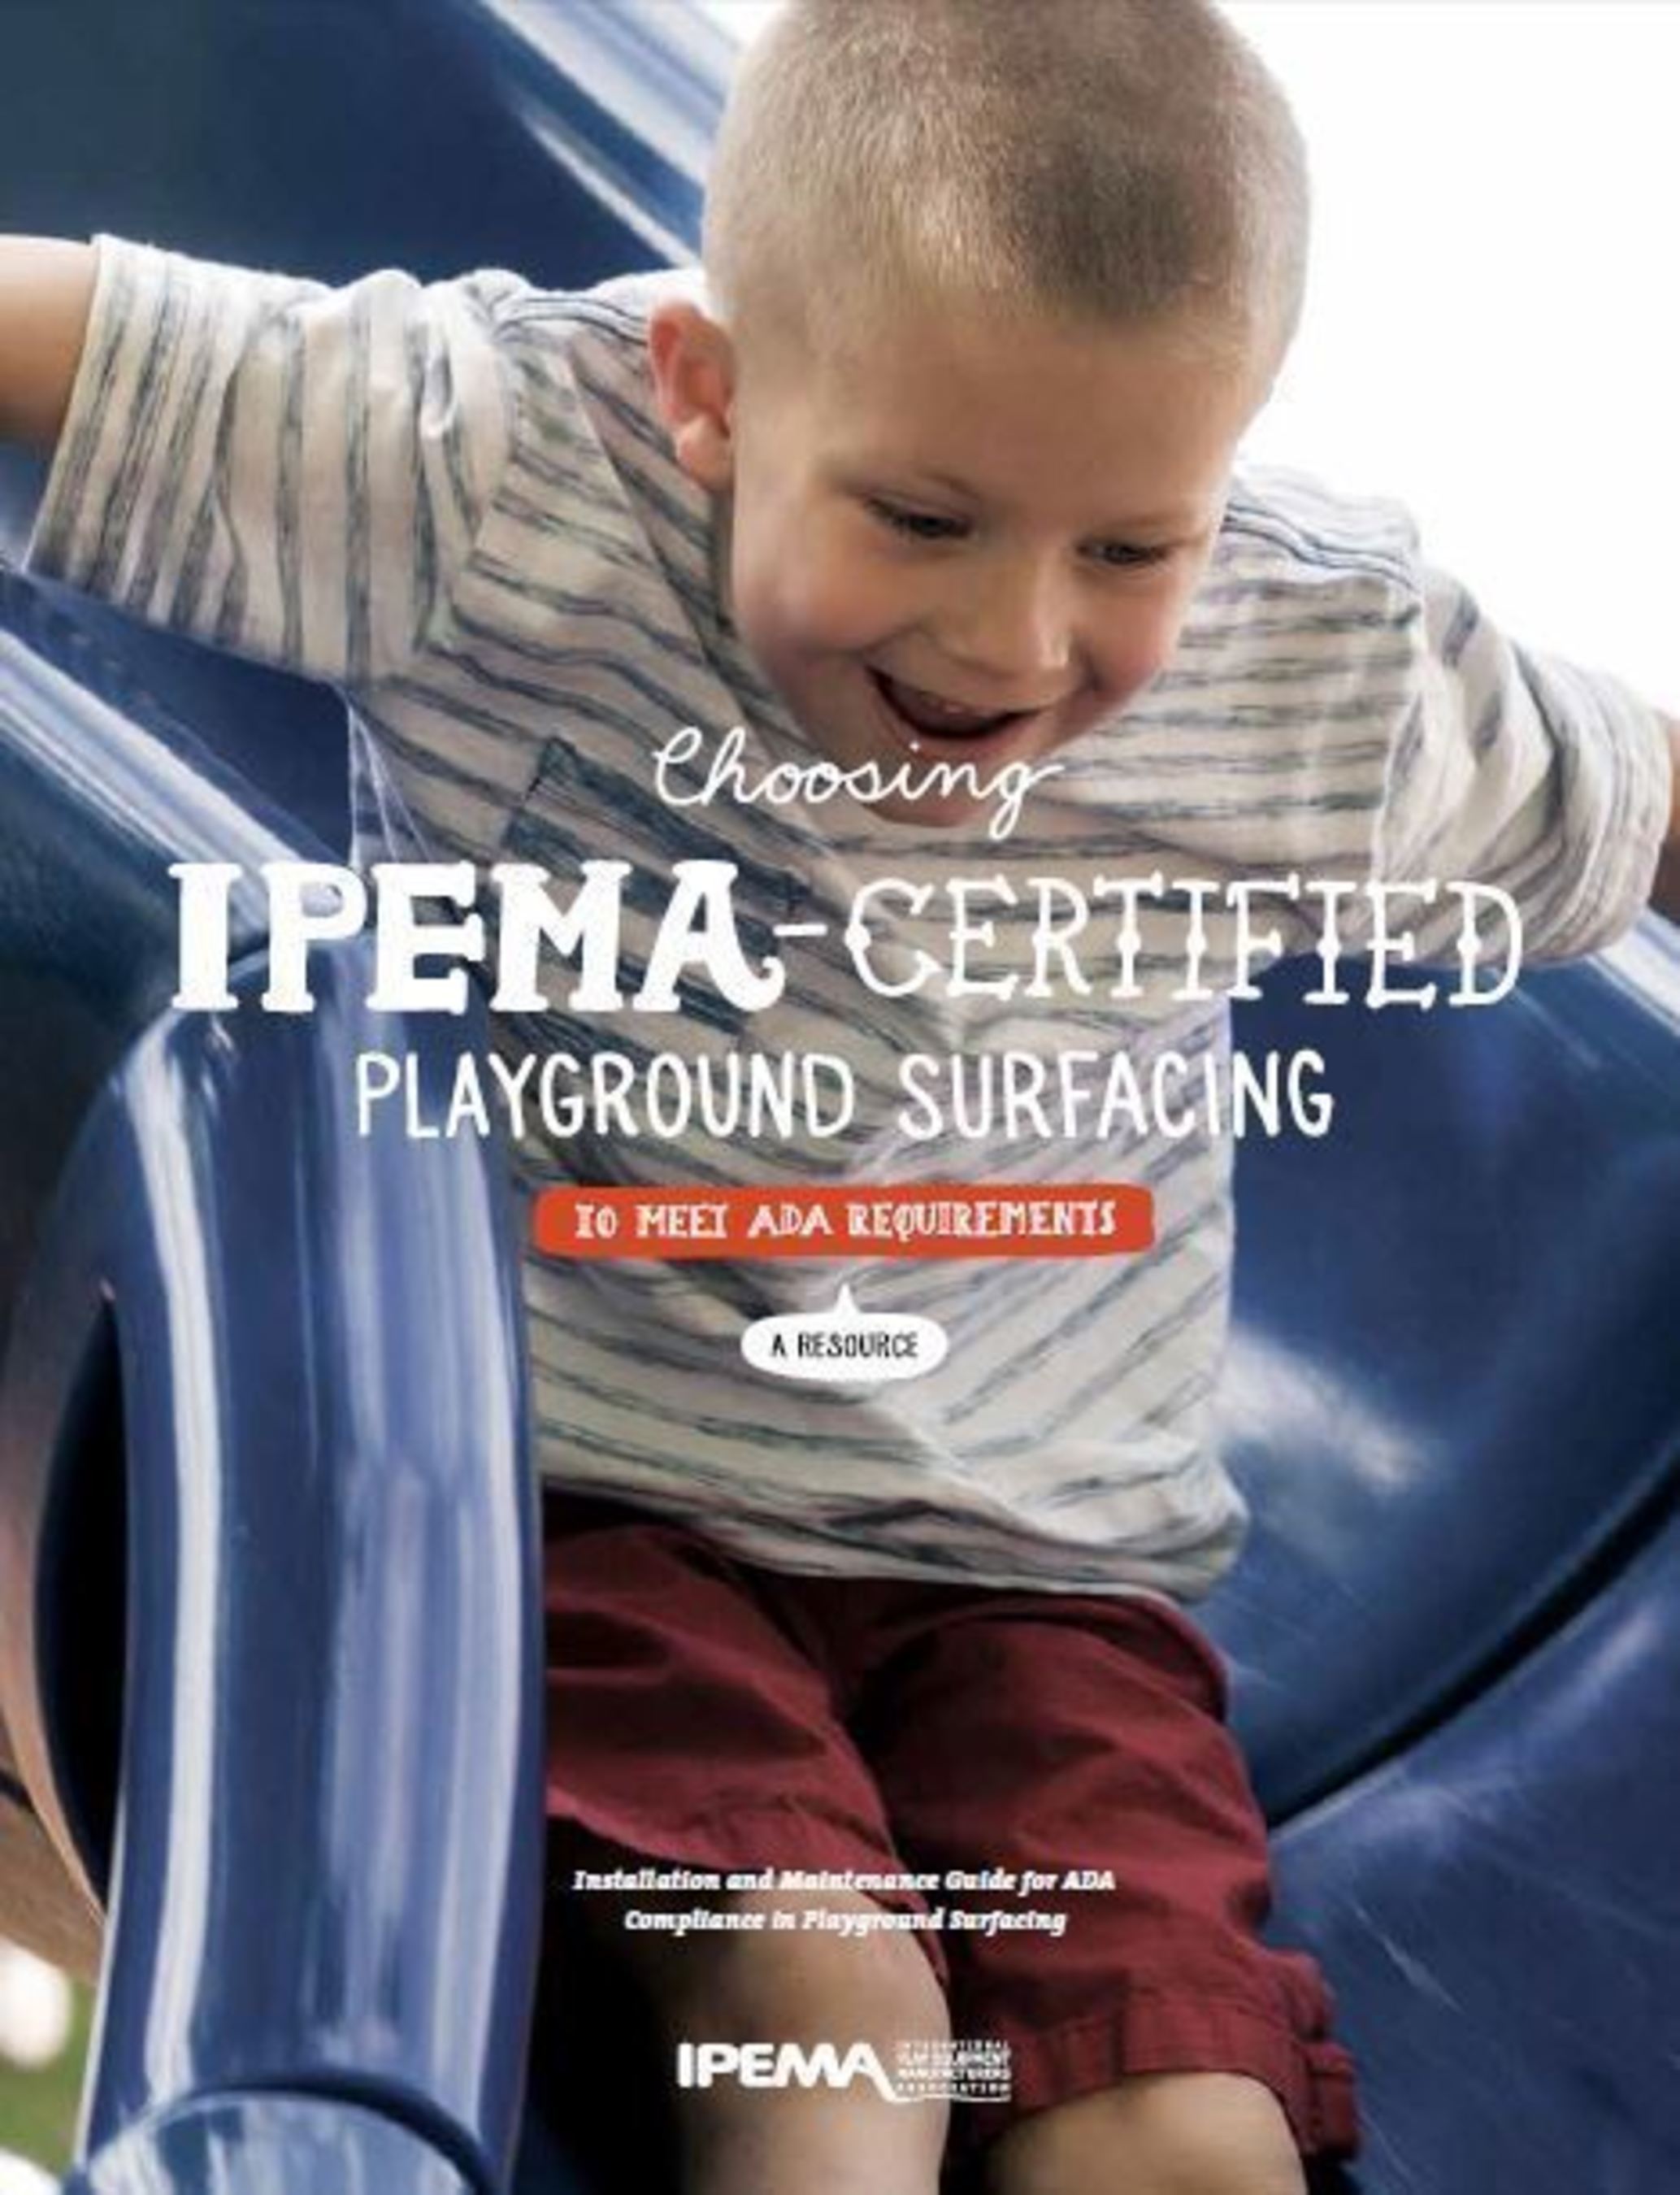 The downloadable, user-friendly brochure summarizes the latest ADA regulations for new construction and maintenance of playgrounds, and provides step-by-step instruction and visuals of the installation and maintenance of all types of IPEMA-certified safety surfacing. (PRNewsFoto/International Play Equipment ...)